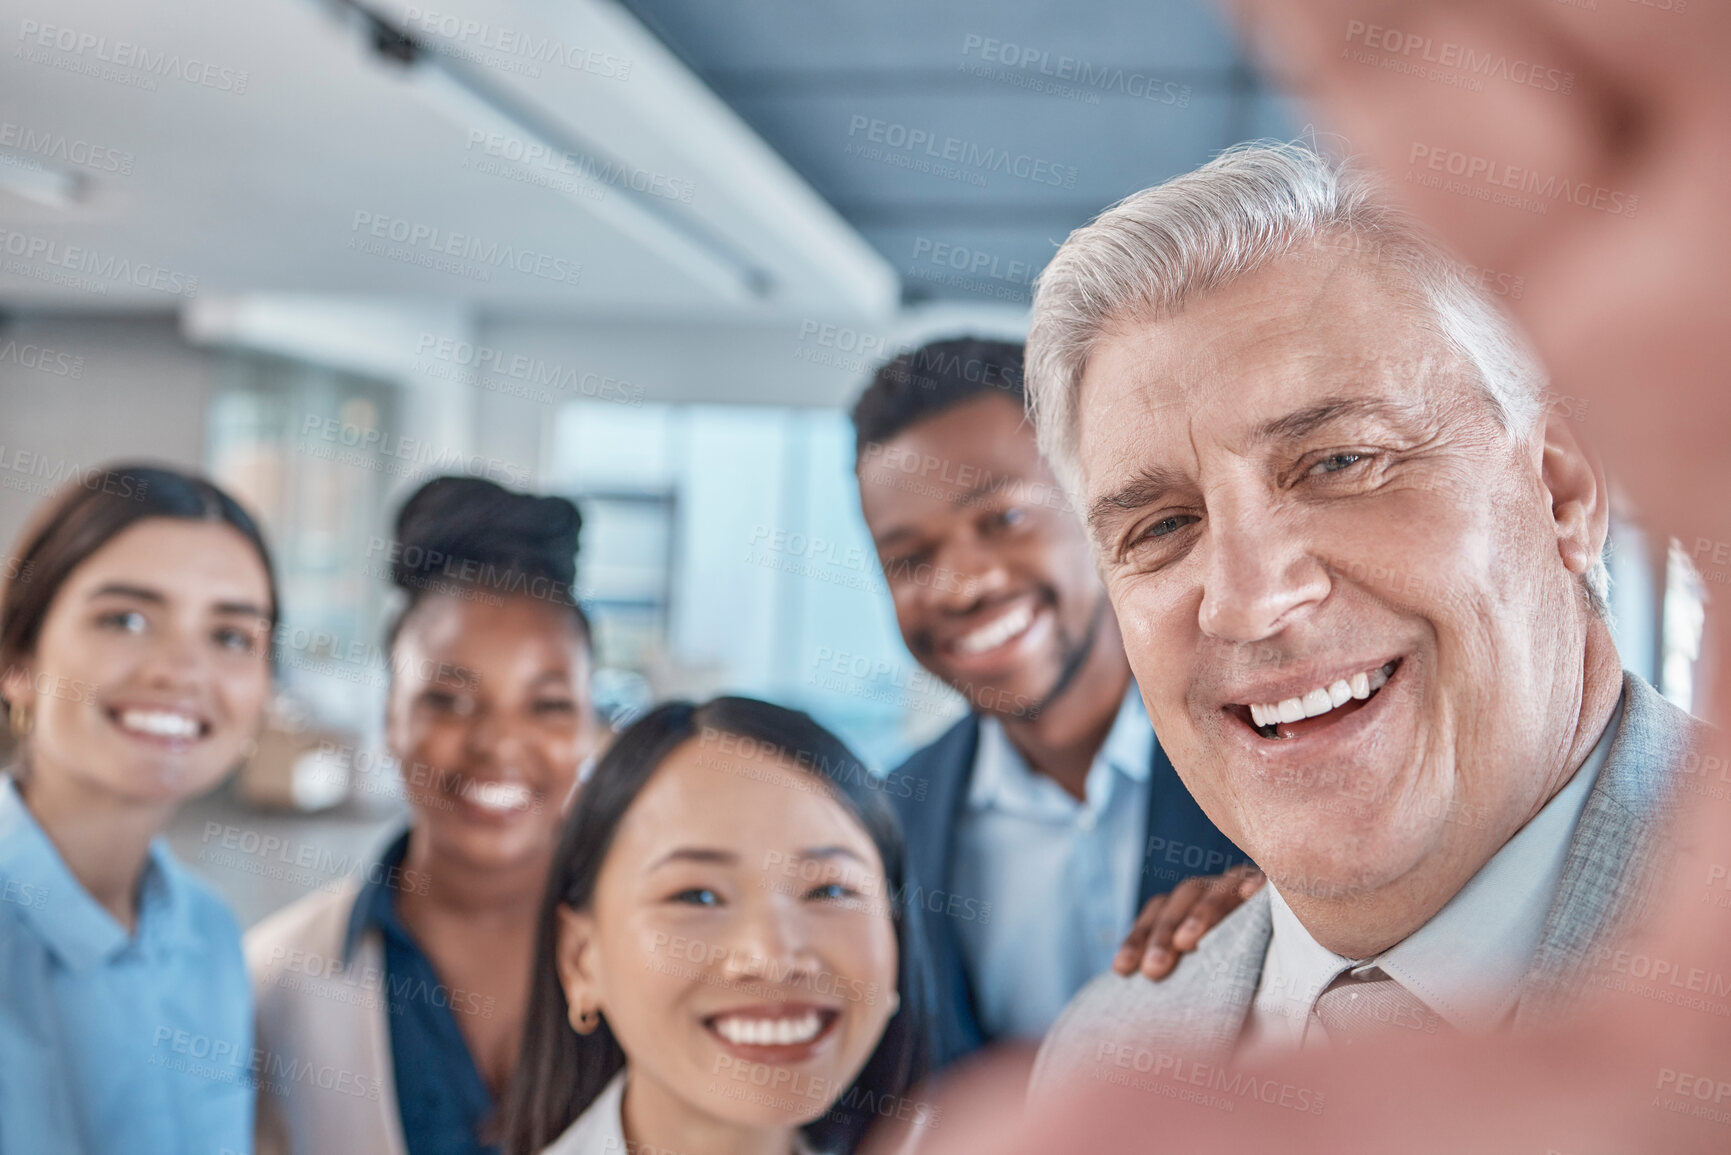 Buy stock photo Selfie, friends and a man ceo with his team posing for a profile picture in the office at work. Portrait, social media or leadership with a business manager taking a photograph with an employee group